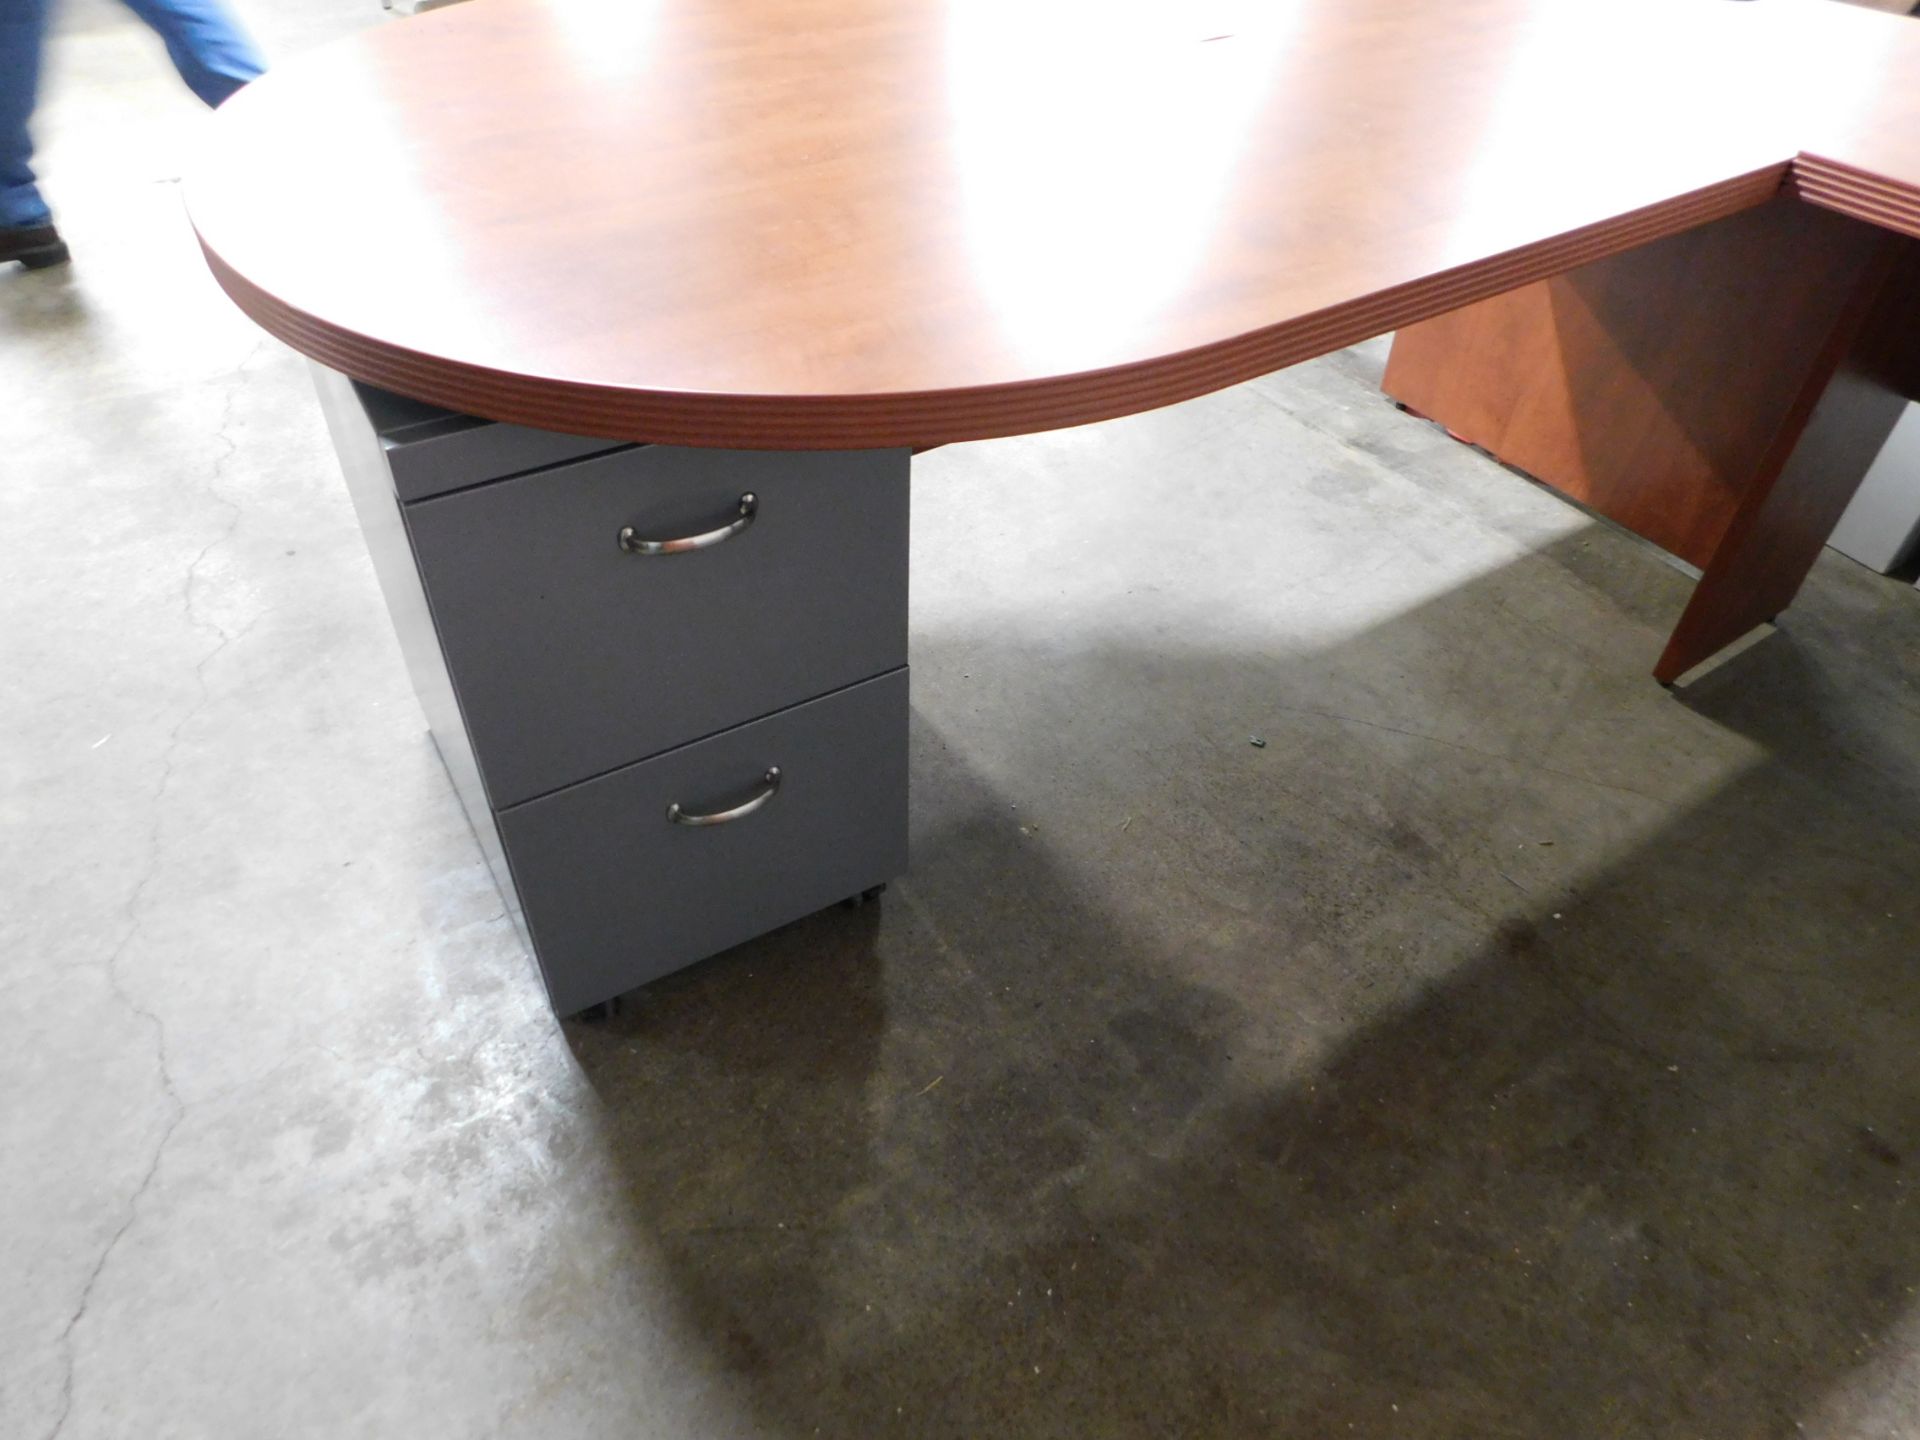 Steelcase L-Shaped Desk with Armoire - Image 2 of 5